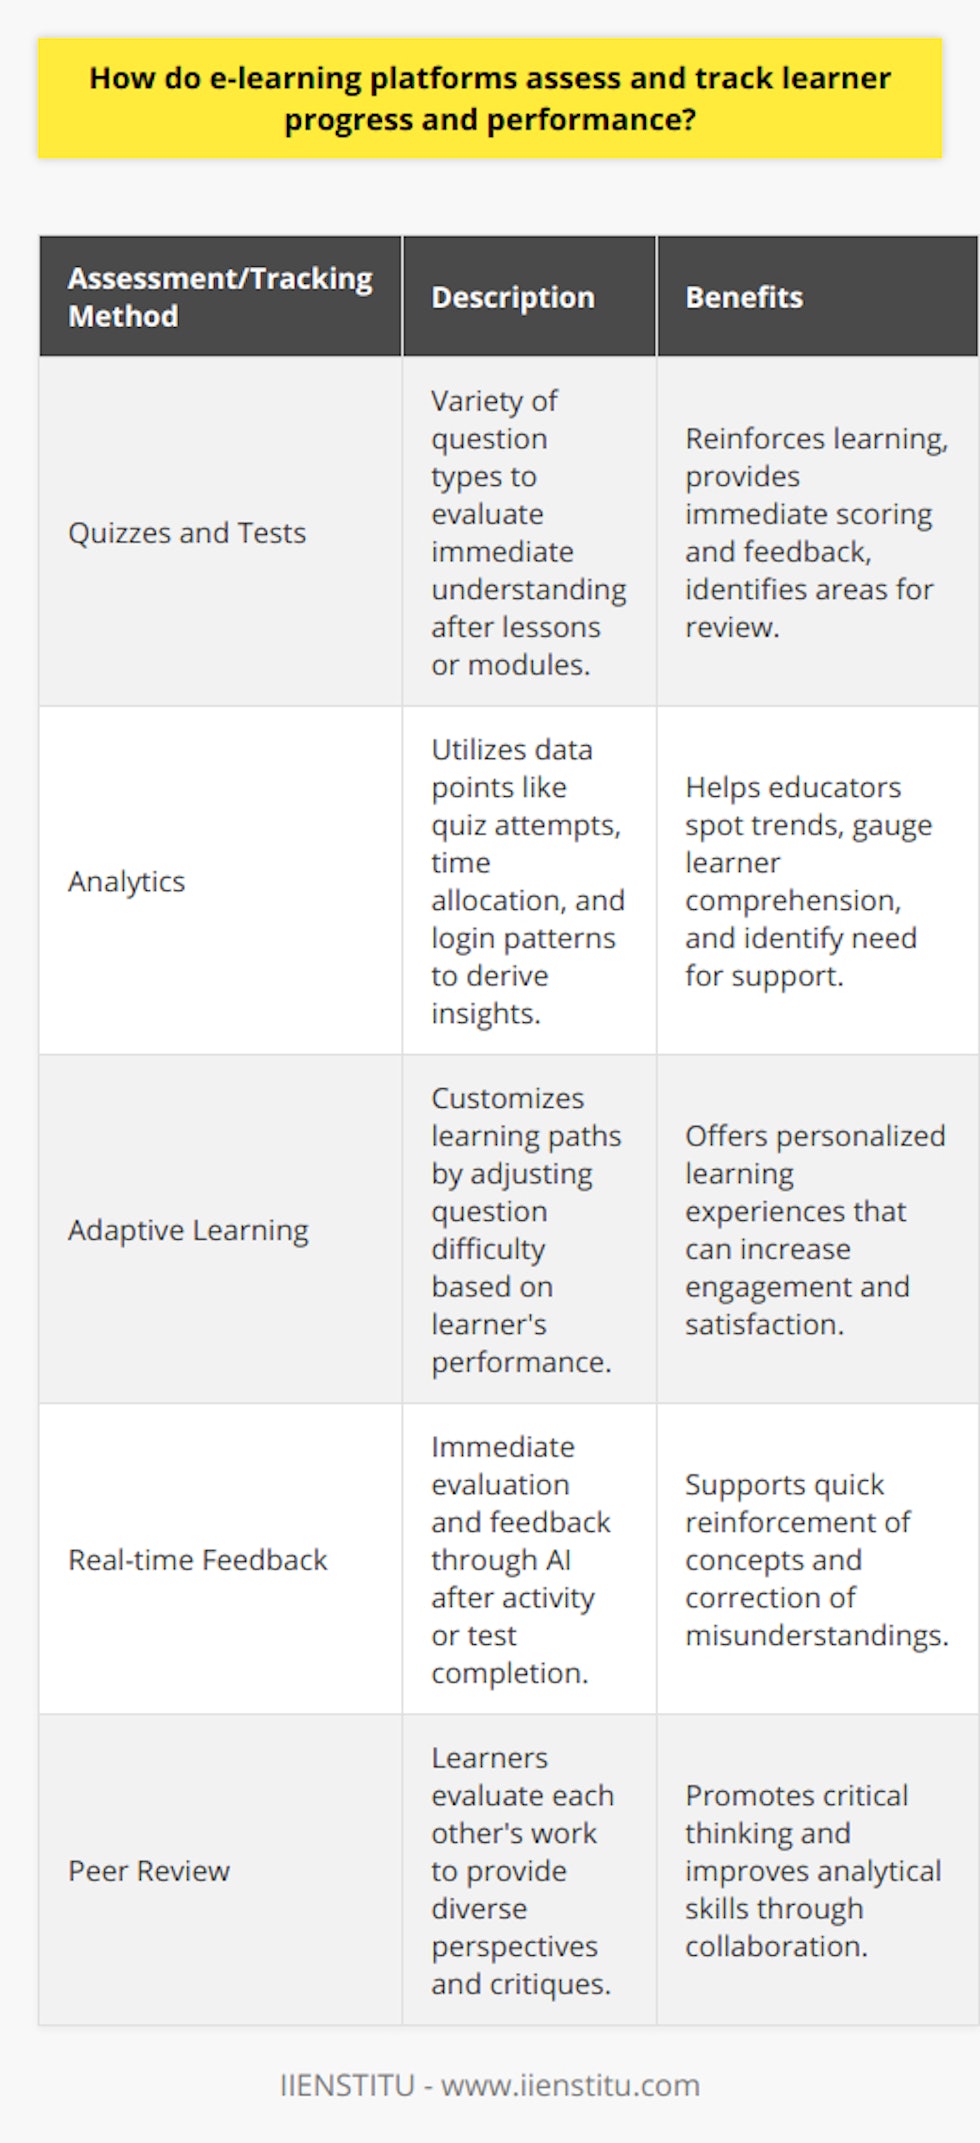 E-learning platforms have revolutionized education by offering flexible, accessible, and personalized learning experiences. A critical aspect of these platforms is their ability to assess and track learner progress and performance effectively.Quizzes and Tests: The Cornerstone of AssessmentTo gauge immediate understanding, e-learning platforms often rely on quizzes or tests to conclude each lesson or module. These assessments can vary greatly in format, including multiple-choice, true/false, short-answer, and essay-type questions. Immediate scoring and feedback can reinforce learning and highlight areas that require further review.Analytics: The Power Behind Performance TrackingThe application of analytics transforms raw data into insightful metrics. E-learning platforms collect data points such as the number of attempts on a quiz, time spent on each question, topics revisited, and login patterns. By analyzing this data, educators and the platform itself can uncover trends that indicate a learner's grasp of the material, dedication to study, and potential need for assistance.Adaptive Learning: Personalized PathwaysElder platforms often implement adaptive learning techniques, which personalize the learning experience. When a learner demonstrates difficulty comprehending a subject, the platform might present additional resources or easier questions to reinforce concepts before moving on. Similarly, a learner excelling in a topic could be presented with more complex material, providing a tailored learning journey that fosters greater engagement and satisfaction.Real-time Feedback: Instantaneous SupportArtificial intelligence plays a pivotal role in providing immediate feedback to learners. As soon as a learner completes an activity or test, the platform can analyze the responses and deliver insights into performance. This feedback might include explanations for any incorrect answers and suggest targeted review resources. The immediacy of this response is invaluable for reinforcing positive learning habits and correcting misunderstandings promptly.Peer Review: Collaborative Learning EnhancementE-learning platforms often facilitate peer review, where learners evaluate each other's work. This collaborative approach broadens the learning experience by incorporating diverse viewpoints and critiques, which is especially valuable in courses focusing on subjective or open-ended material. It encourages learners to think critically about their work and others', deepening understanding and honing analytical skills.In summary, e-learning platforms leverage an array of strategies to ascertain and track learner progress. By combining regular assessments, advanced data analytics, personalized learning paths, instant feedback, and collaborative peer review, these platforms can build a comprehensive picture of each learner's journey. The ultimate aim is a tailored education experience that adapts to individual needs, helping learners achieve their potential at their own pace.